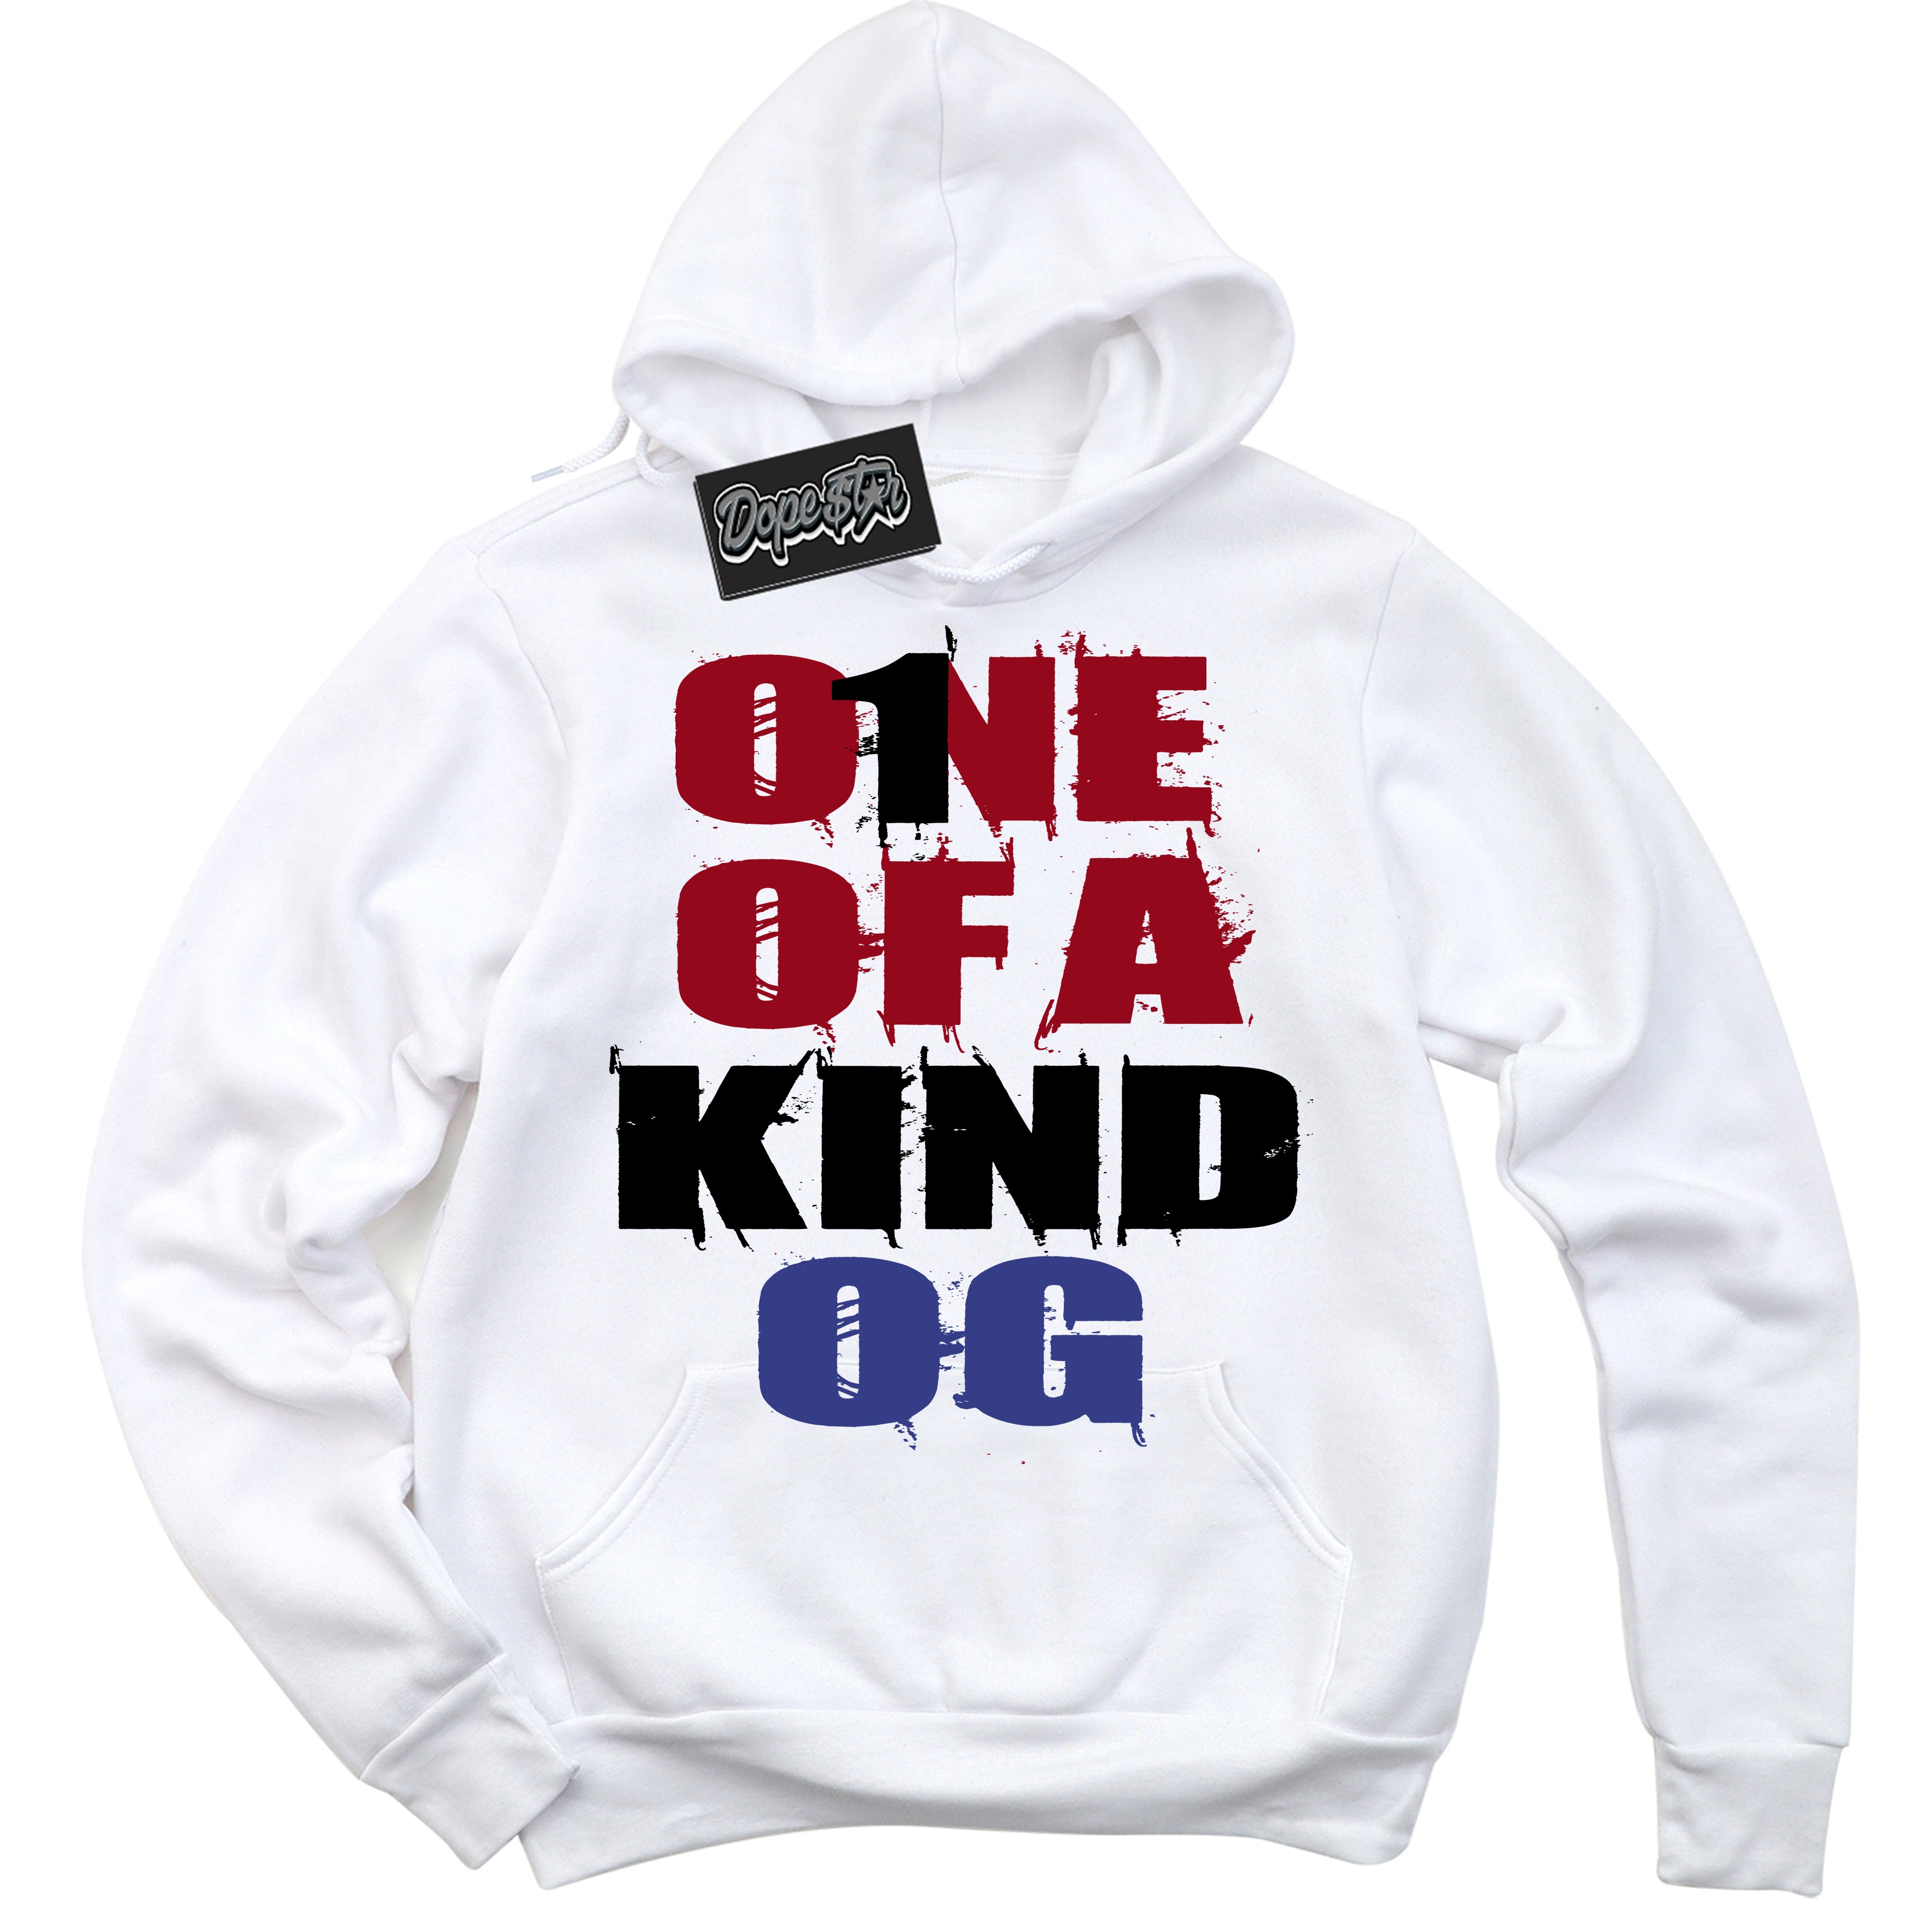 Cool White Hoodie with “ One Of A Kind ”  design that Perfectly Matches Playoffs 8s Sneakers.